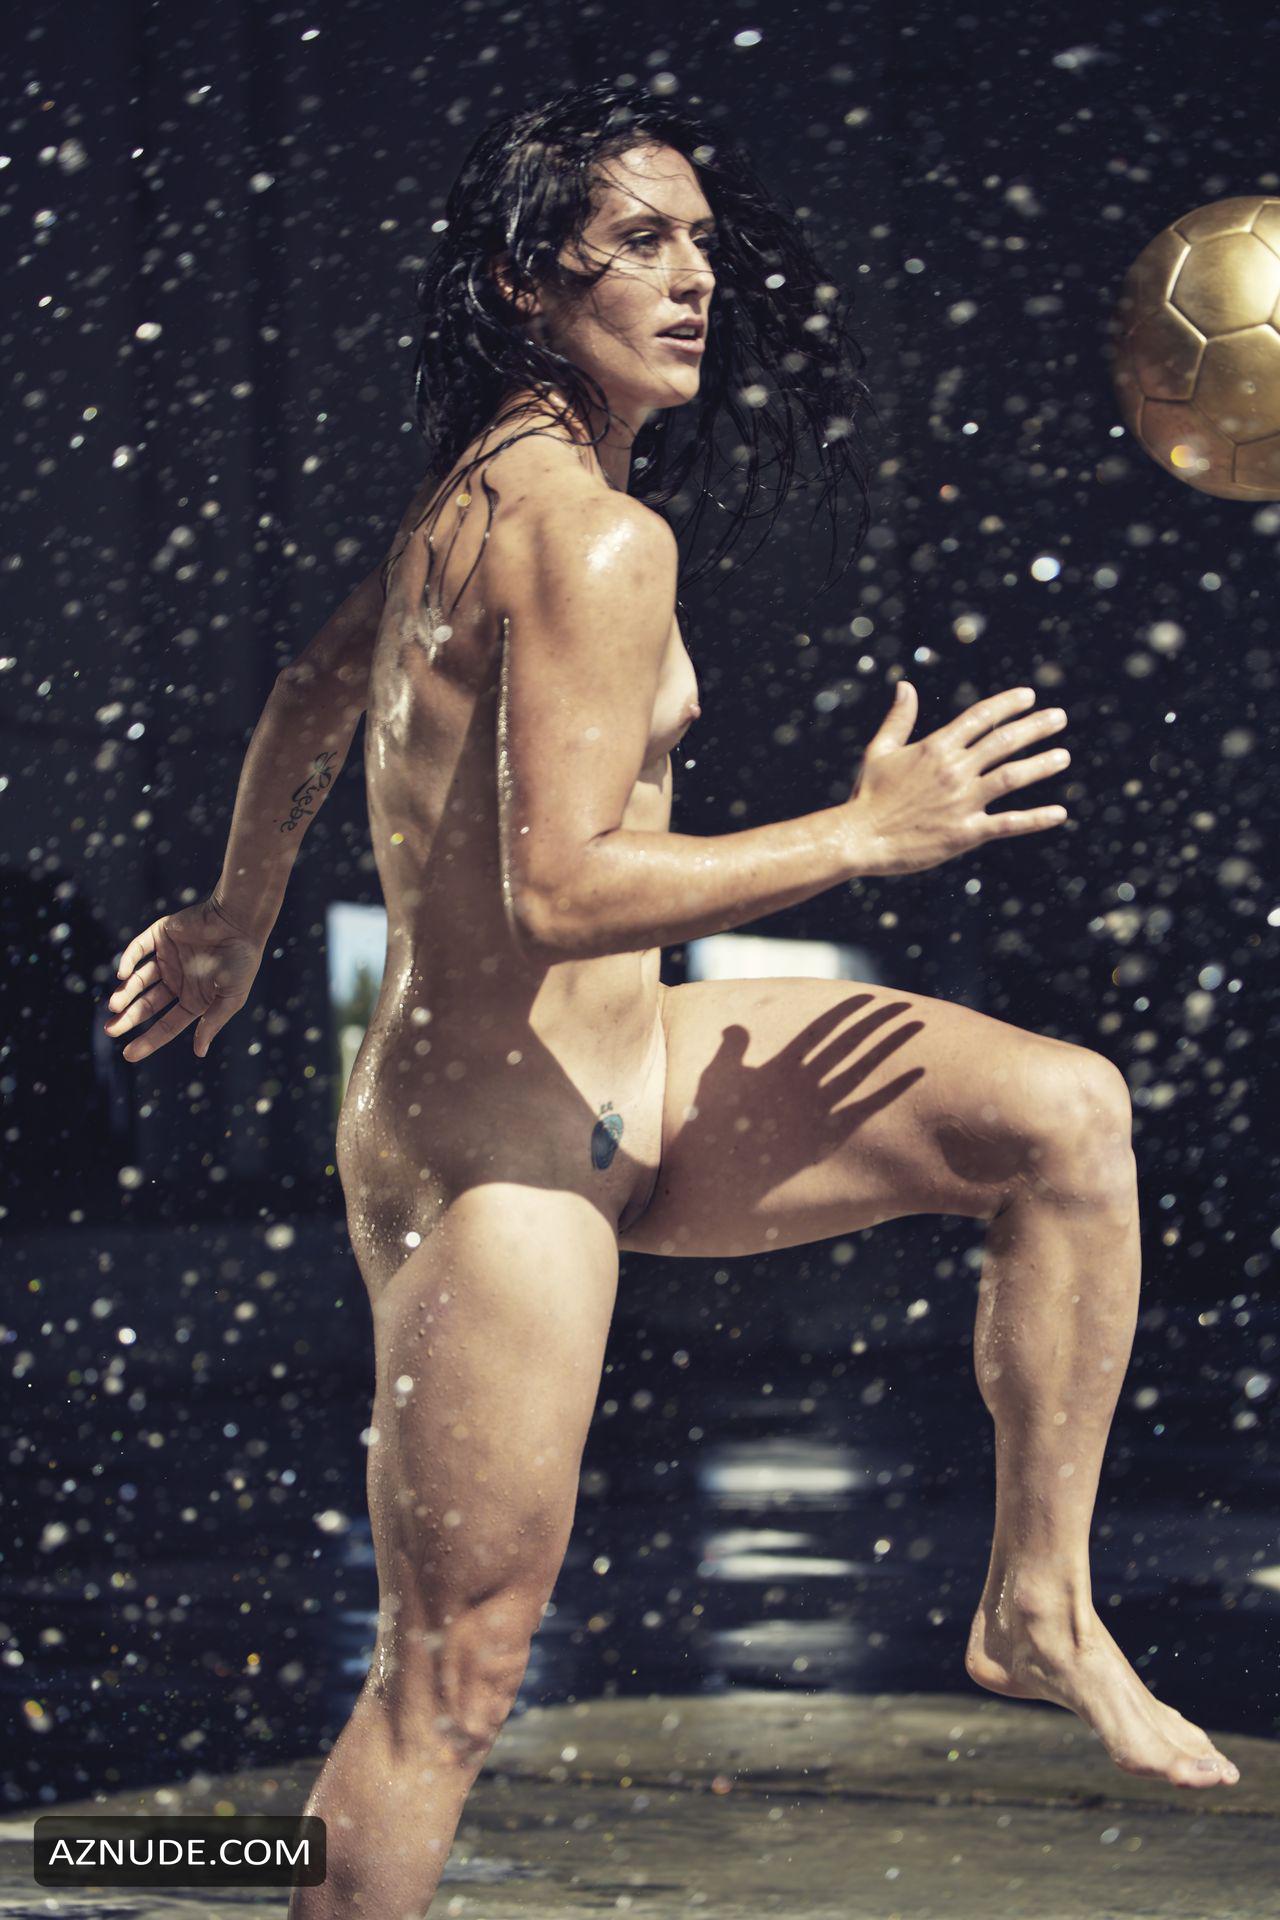 Ali Krieger Pussy From Espn Body Issue Pics The Best Porn Website